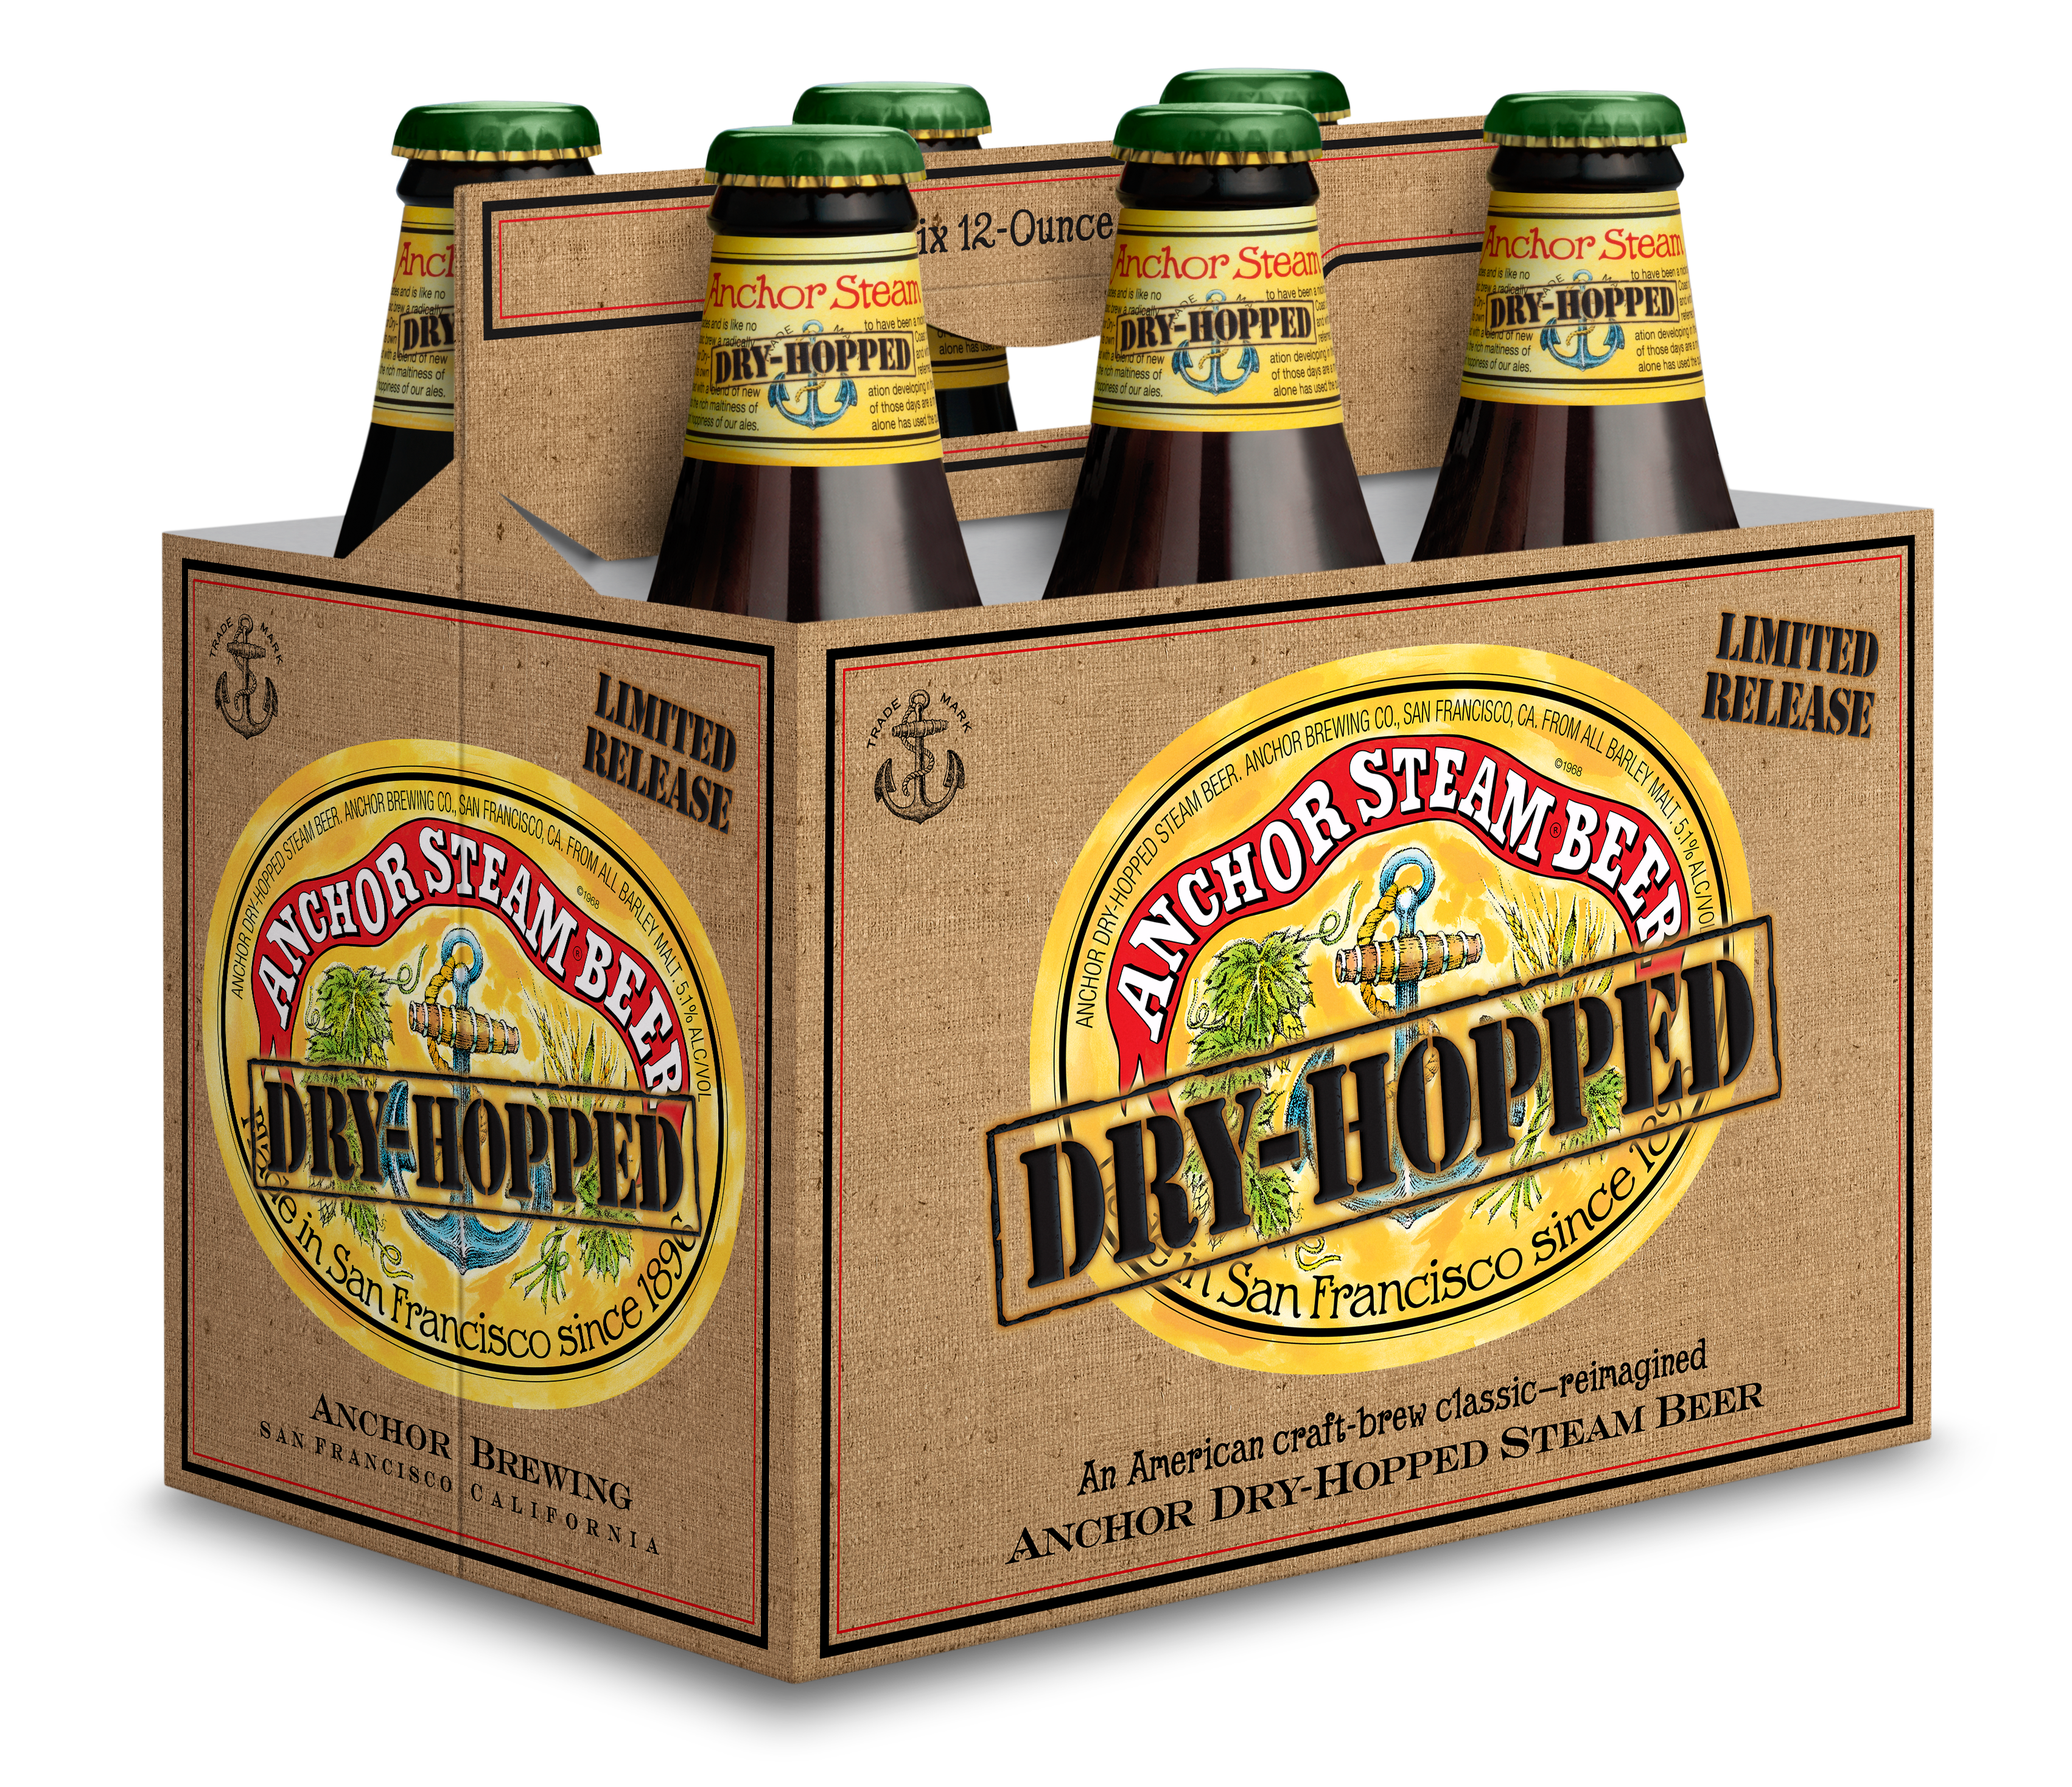 Anchor Brewing Company Debuts Anchor Dry-Hopped Steam Beer™ An American  Craft-Brew Classic—Reimagined